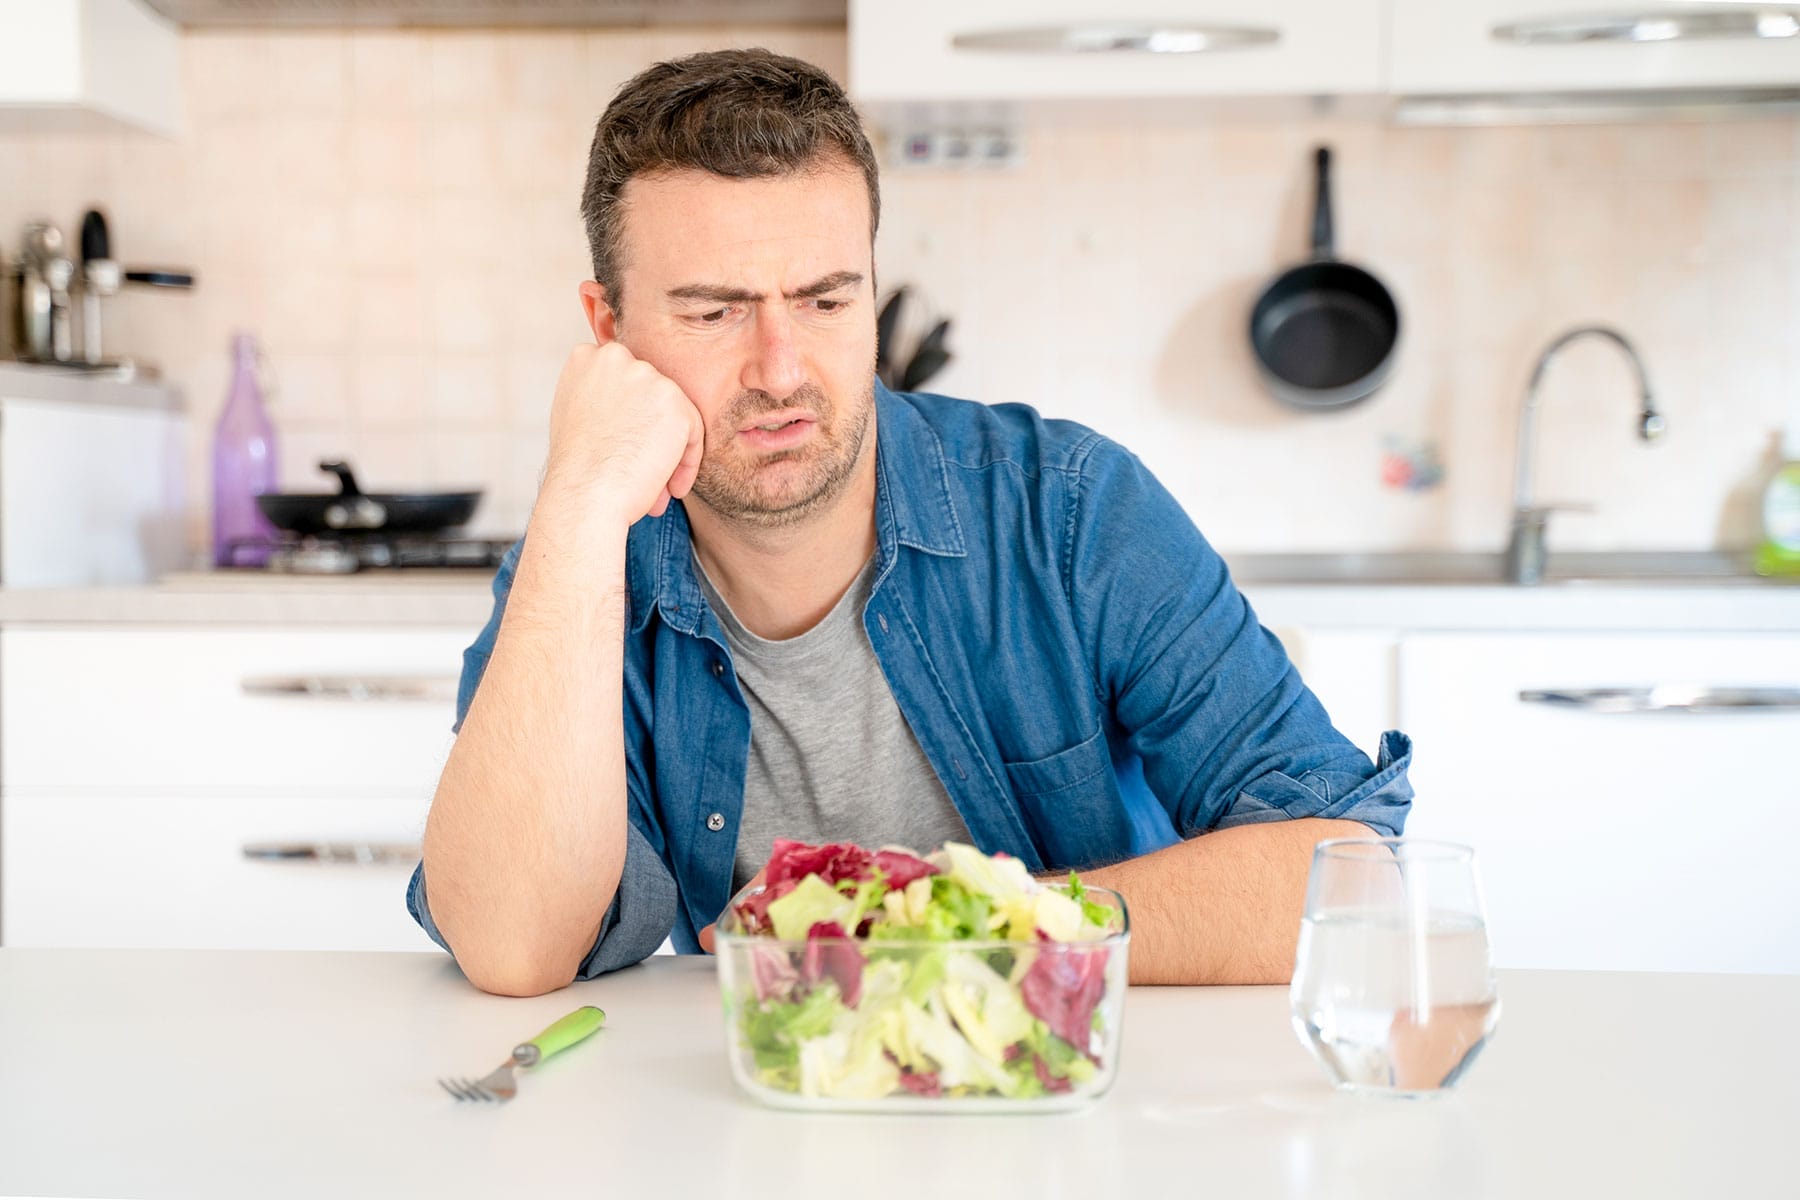 Man looks at salad with disgust, while dealing with eating disorder triggers